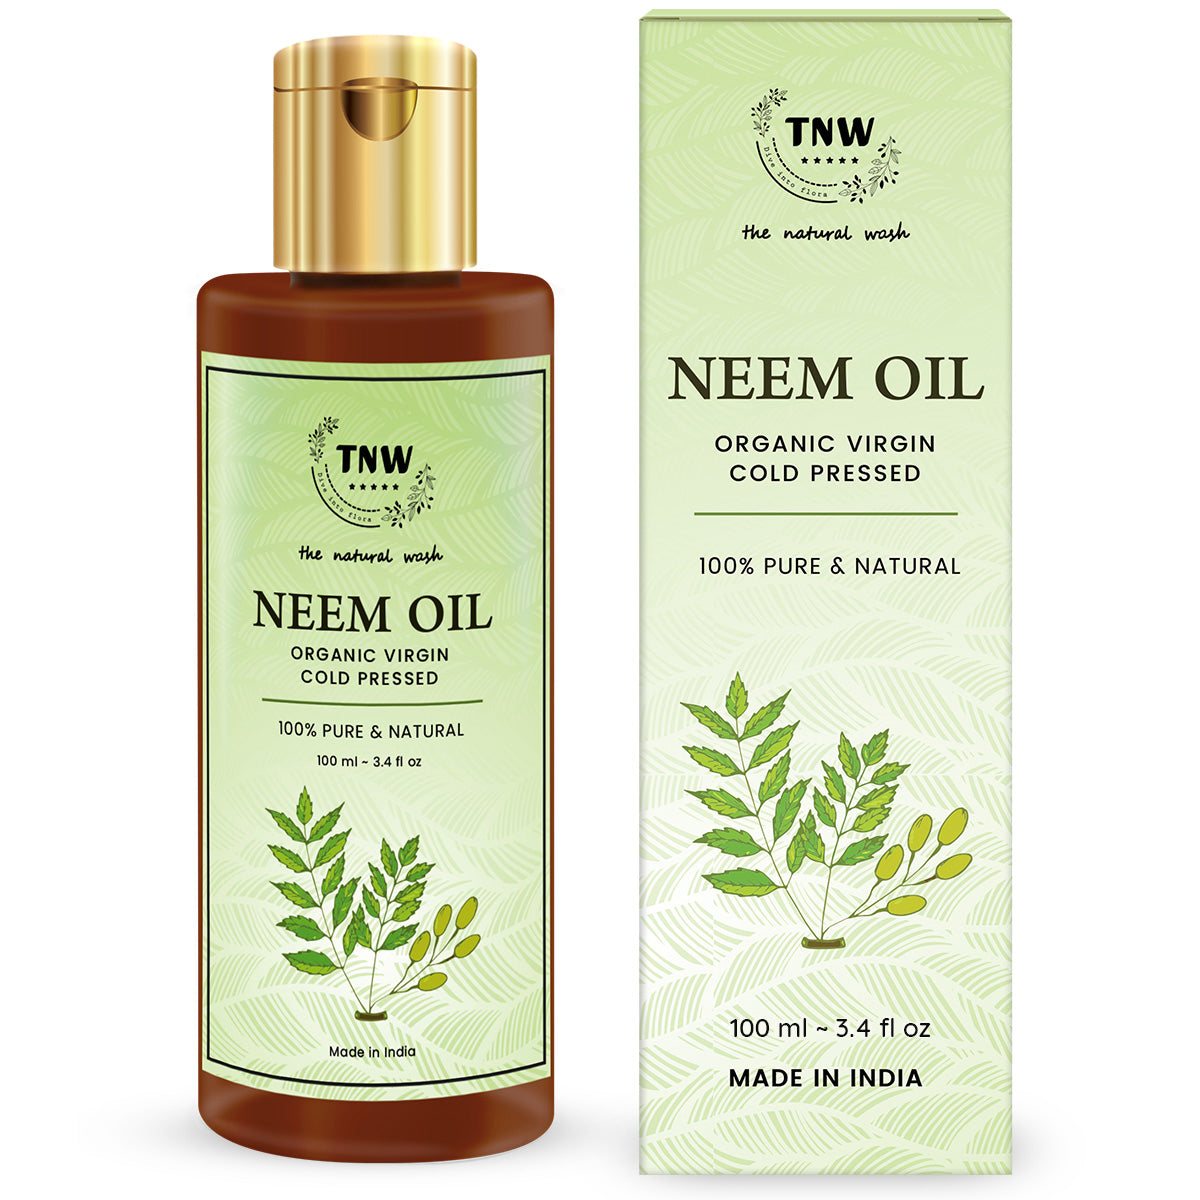 Neem oil | Skin & Hair Care products | The Natural Wash